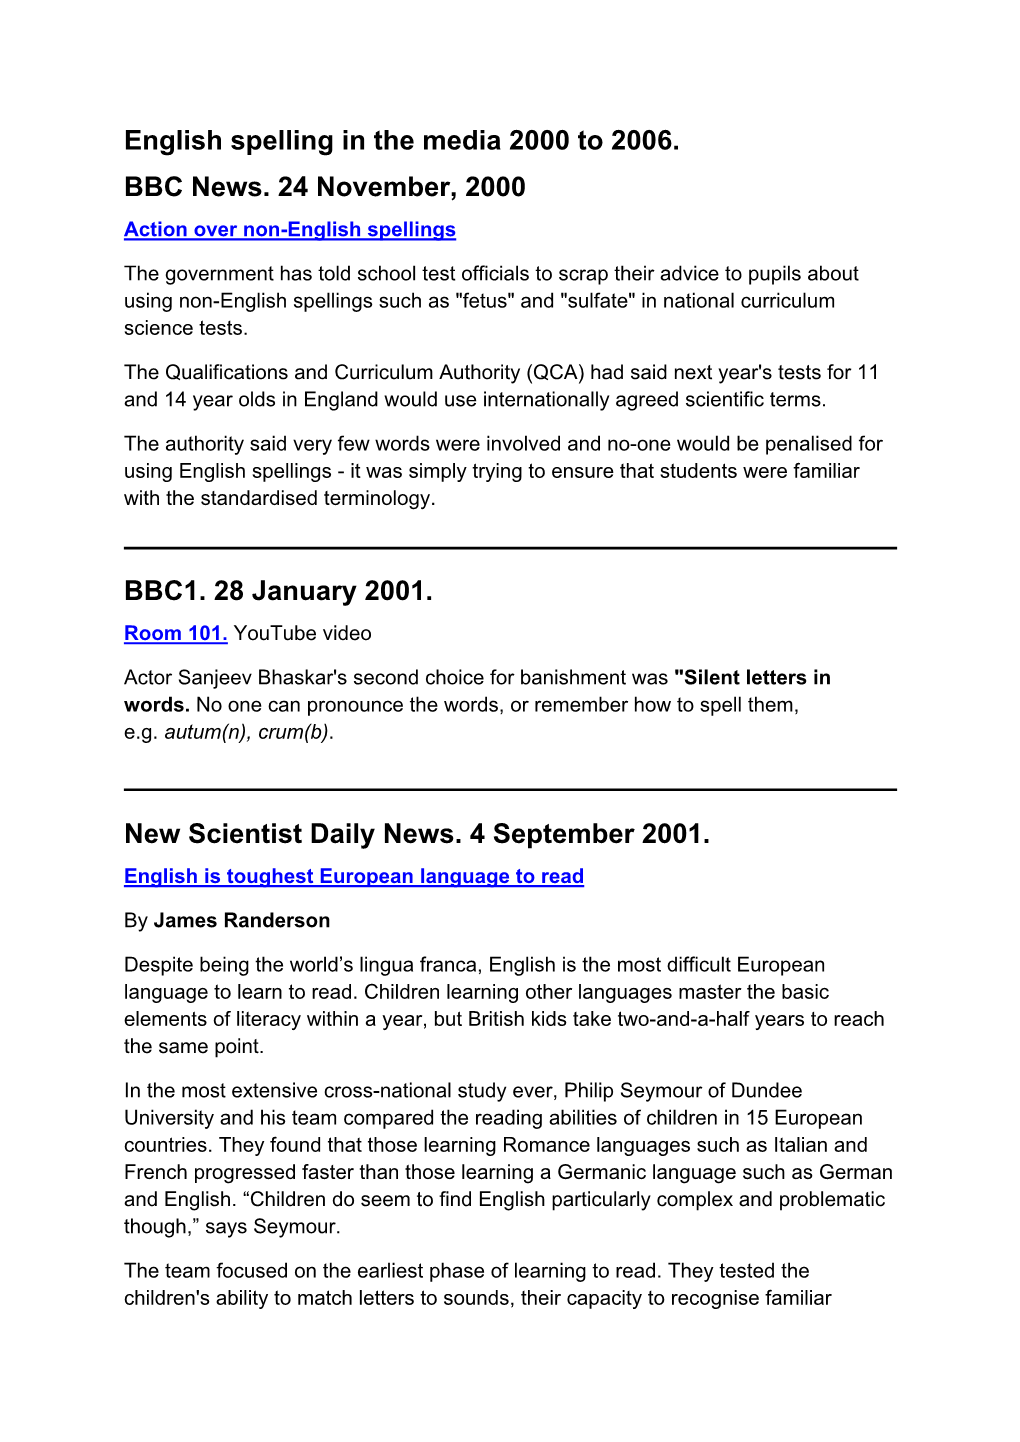 English Spelling in the Media 2000-2006